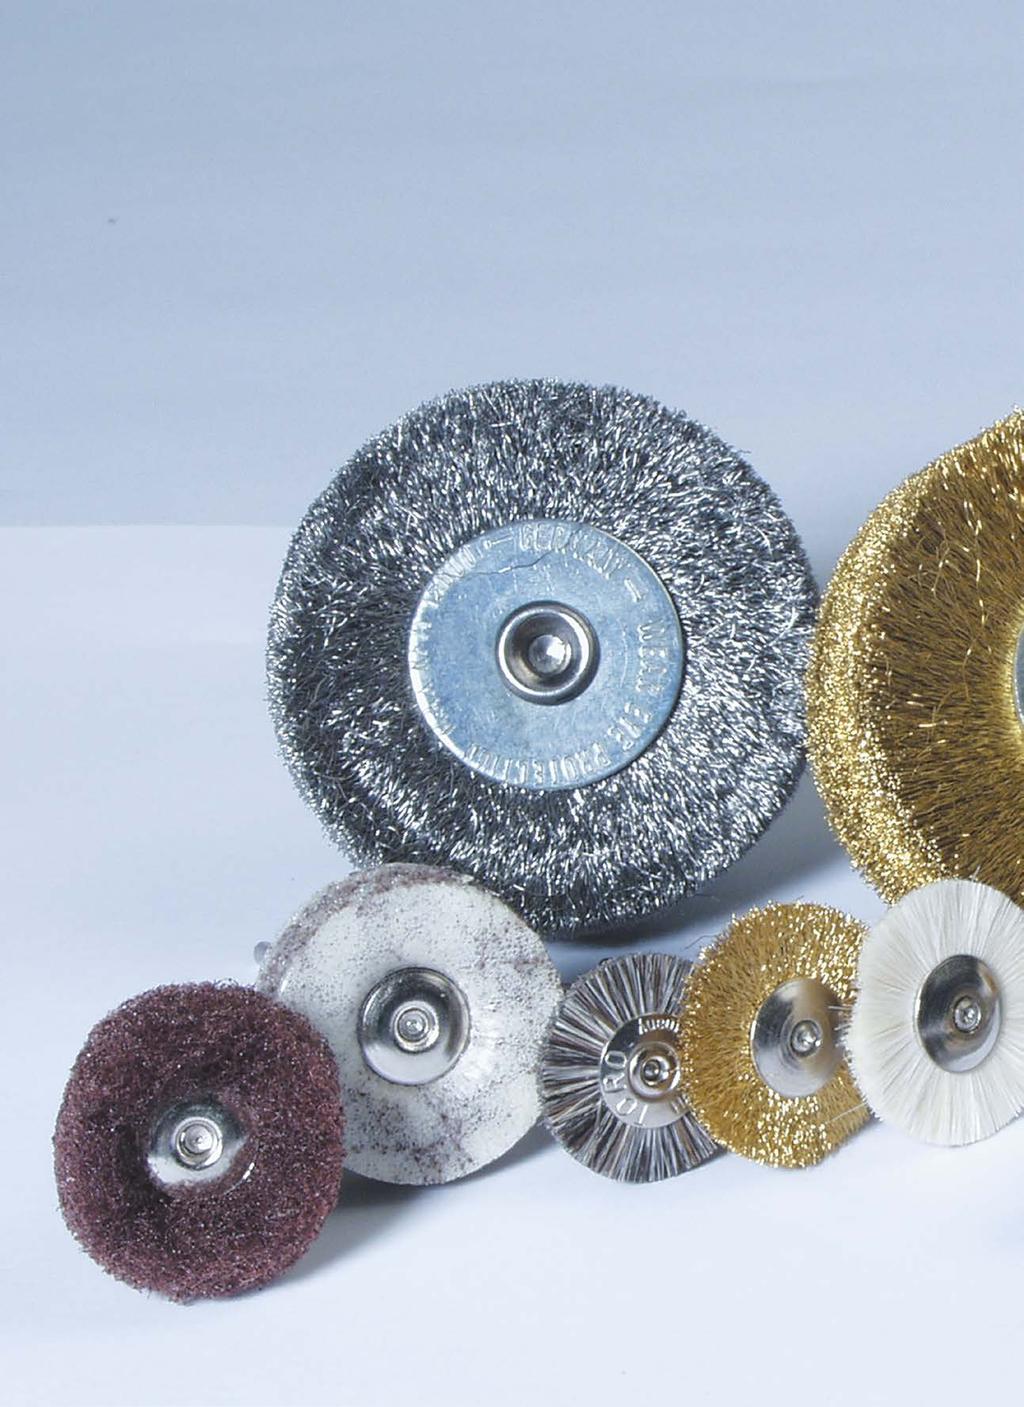 Polishing brushes and buff wheels 9 Fleece polishing wheels with shank Polishing brushes and buff wheels with shaft Polishing grinding discs joke HABRAS Convolute compact grinding discs Round brushes